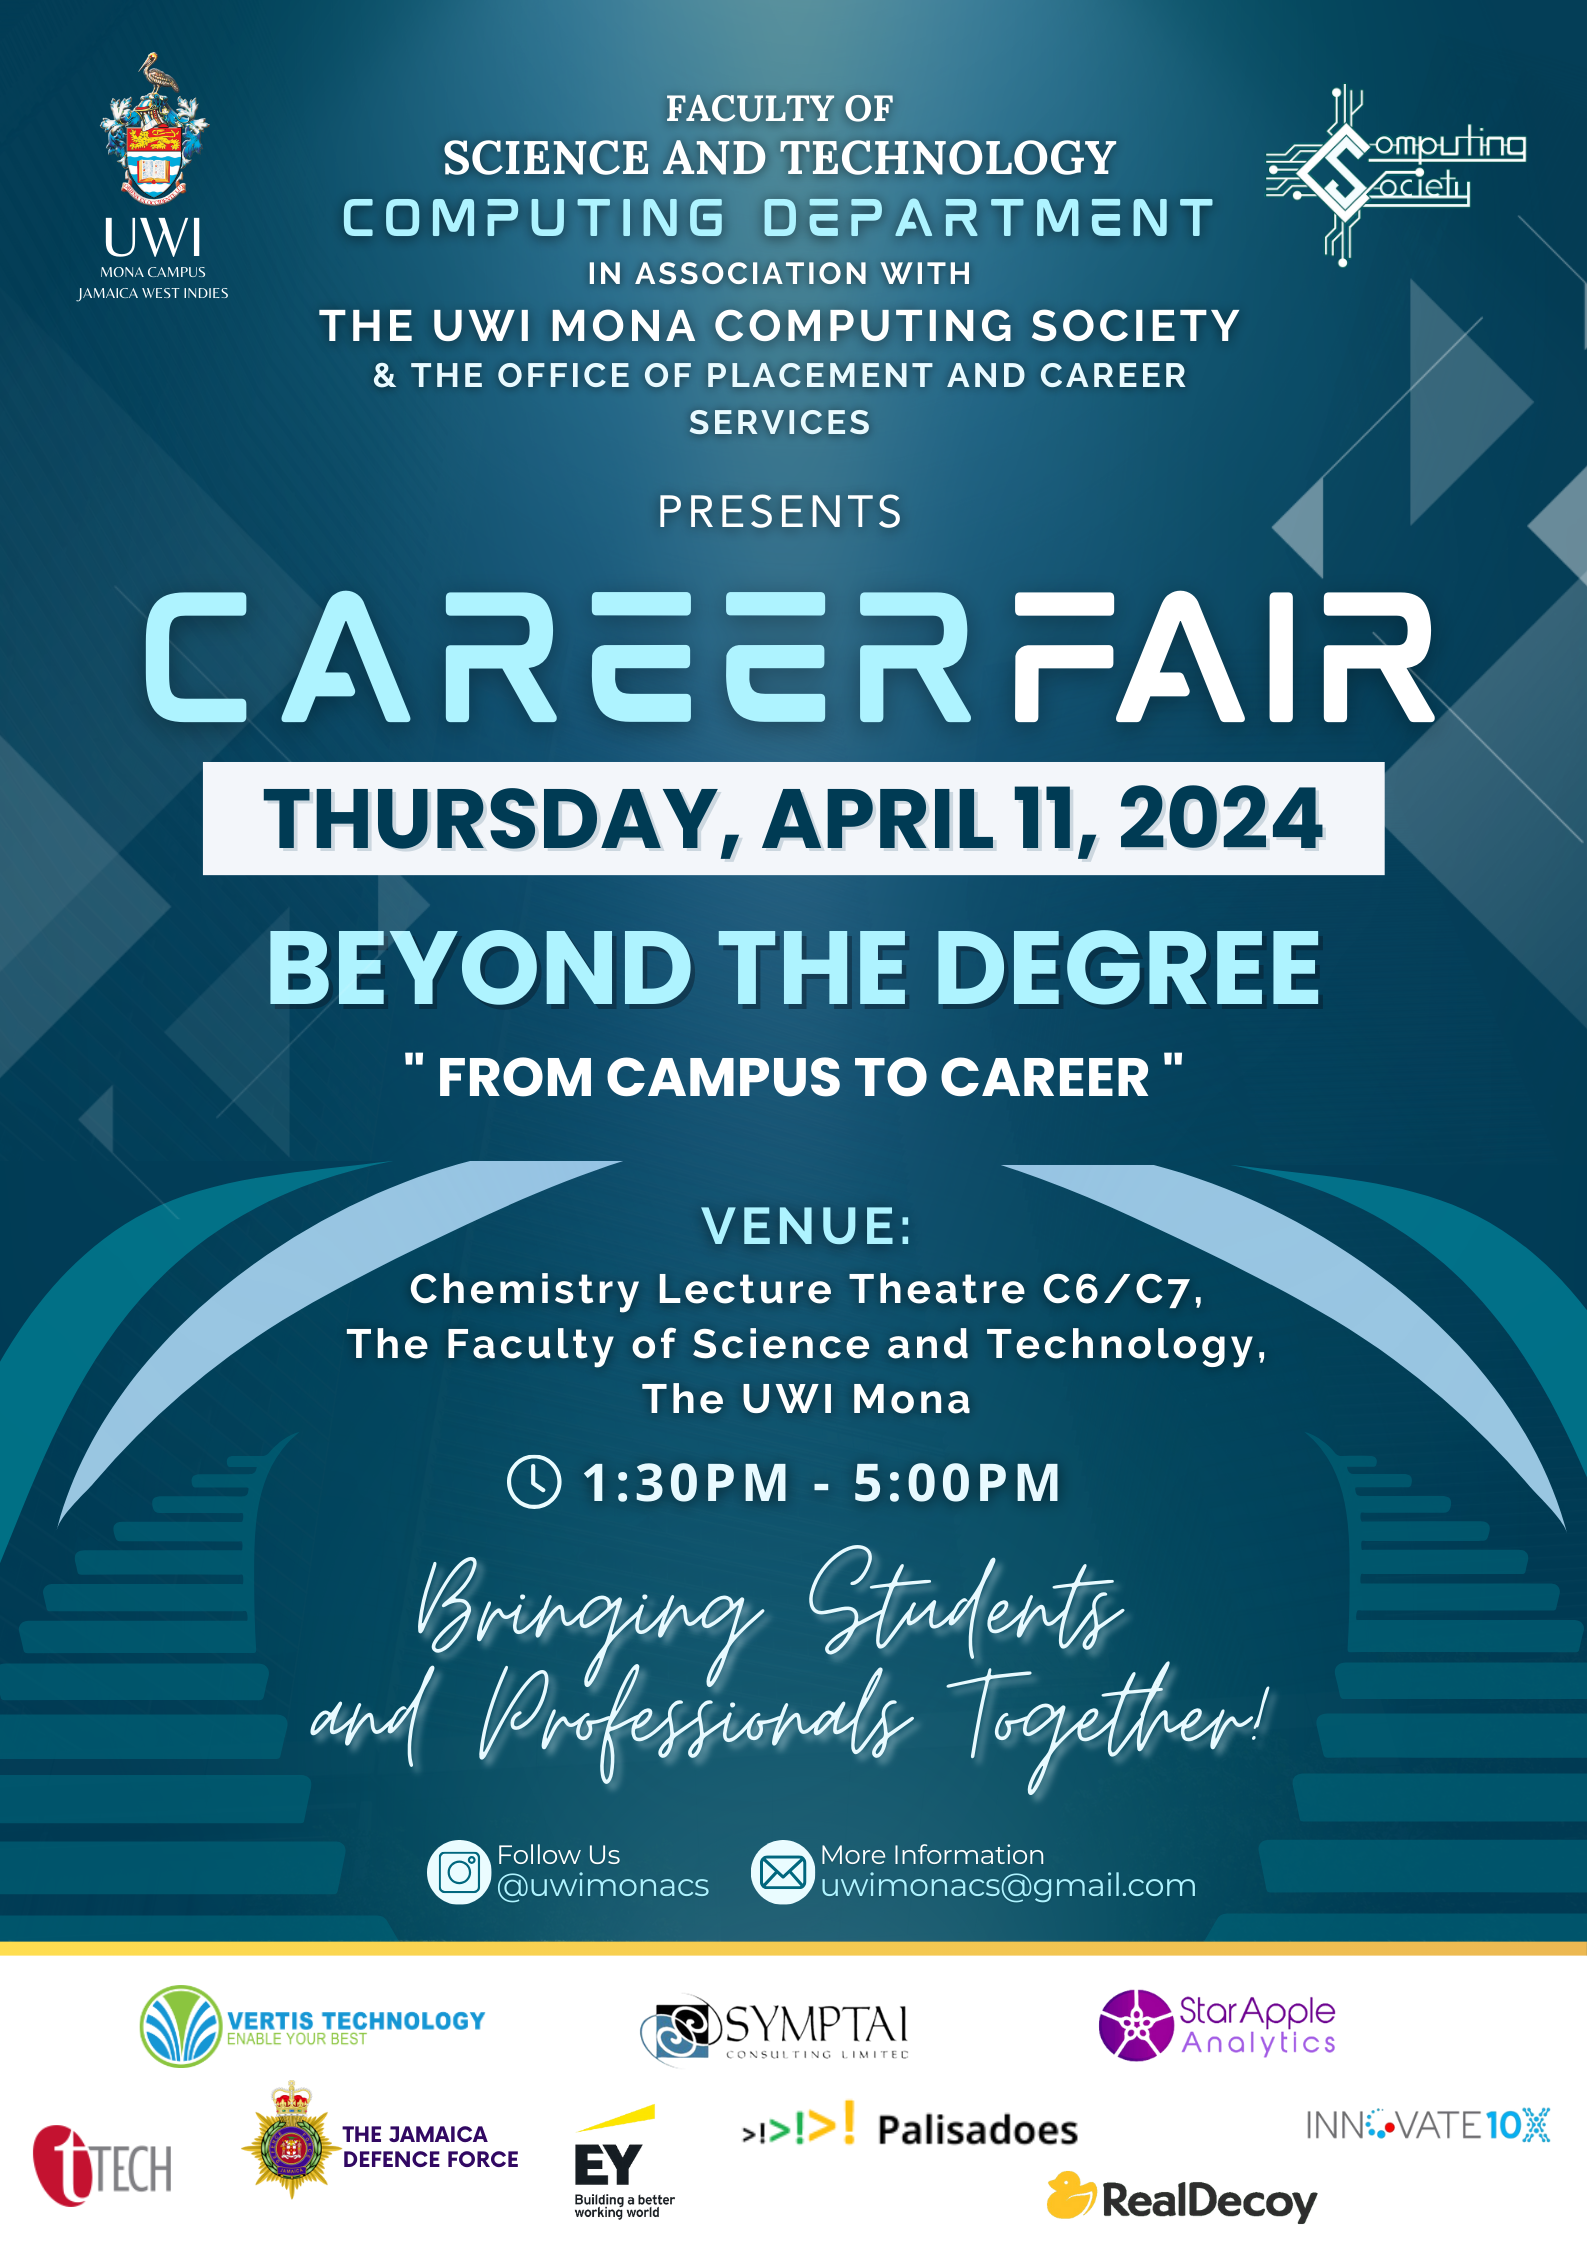 Career Fair: Beyond the Degree - From Campus to Career